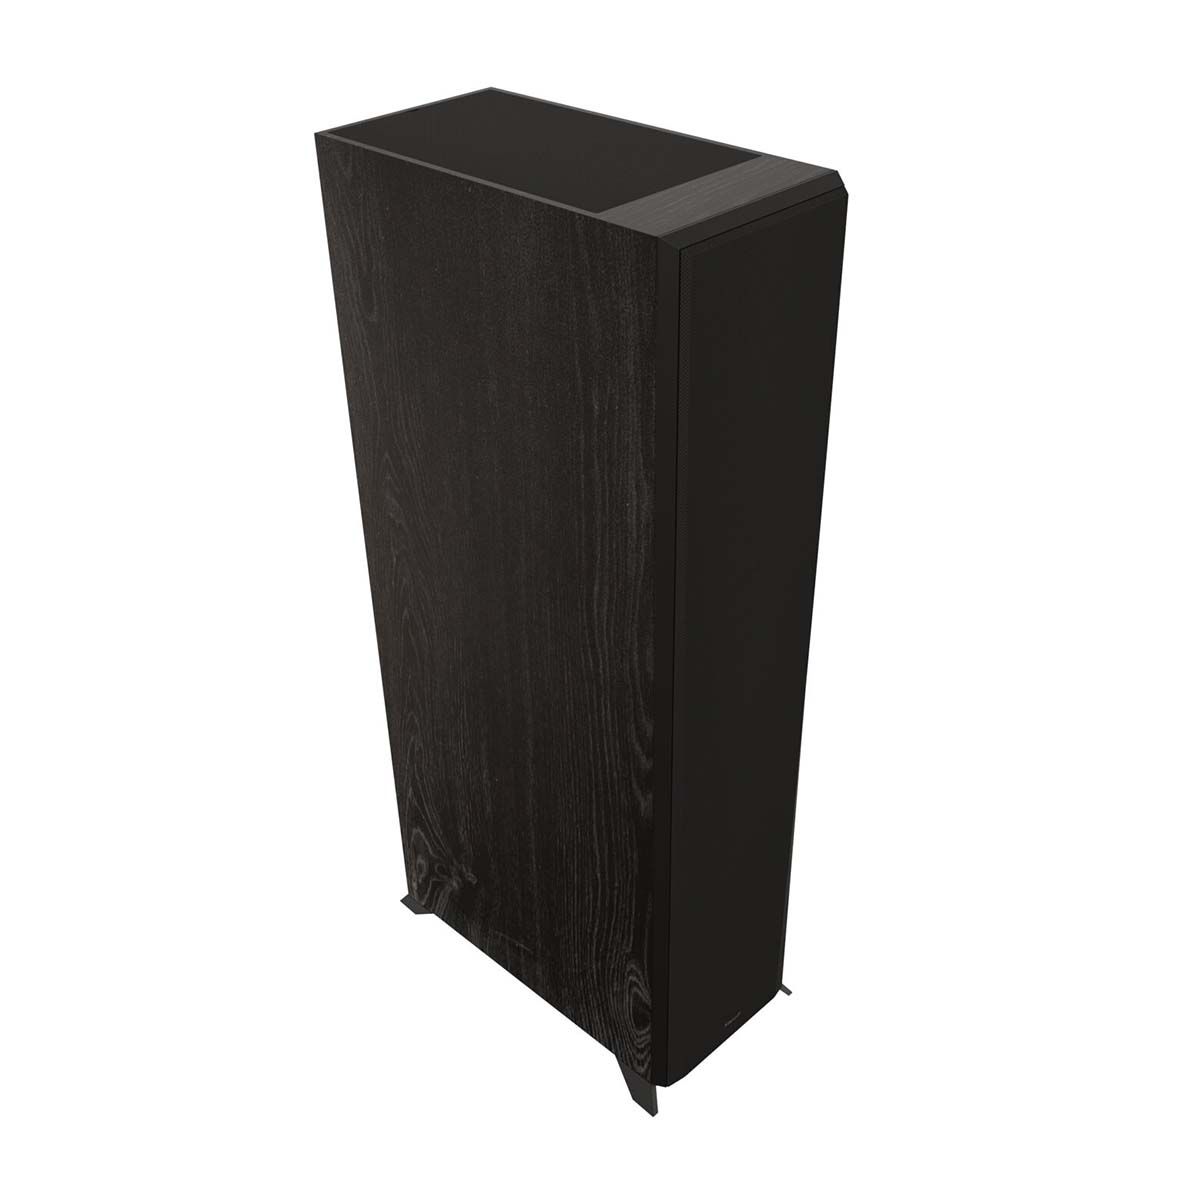 Klipsch RP-8060FA II Dolby Atmos Floorstanding Speaker - Ebony - angled front view with grill